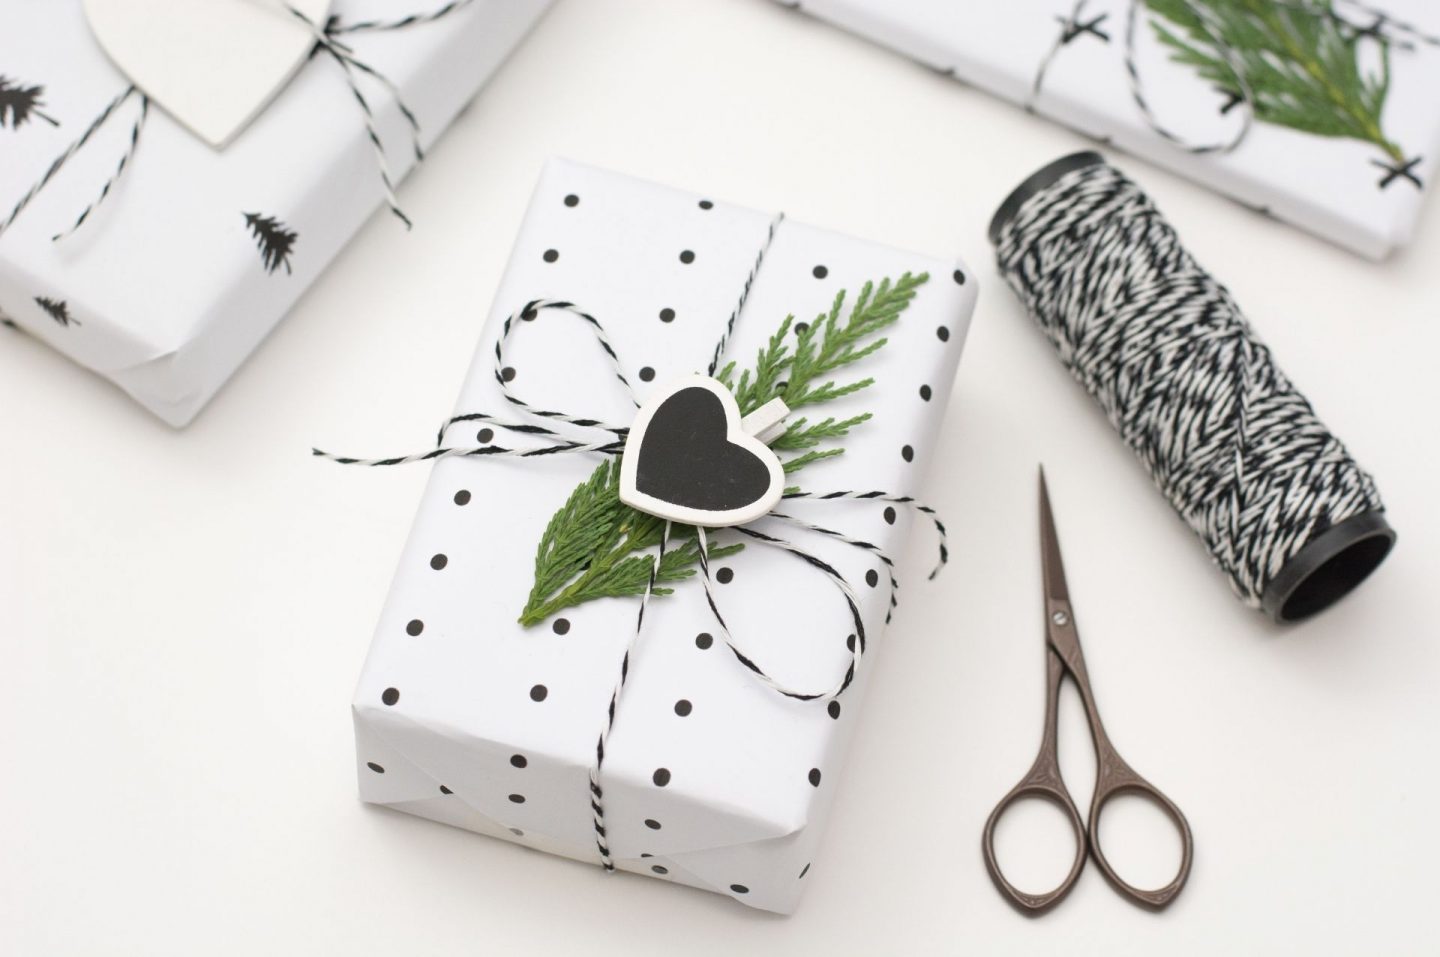 A photo of Christmas gifts that are being wrapped in black with black polka dots and Christmas tree paper. There's a black and white ball of twins and a pair of scissors next to the gifts.